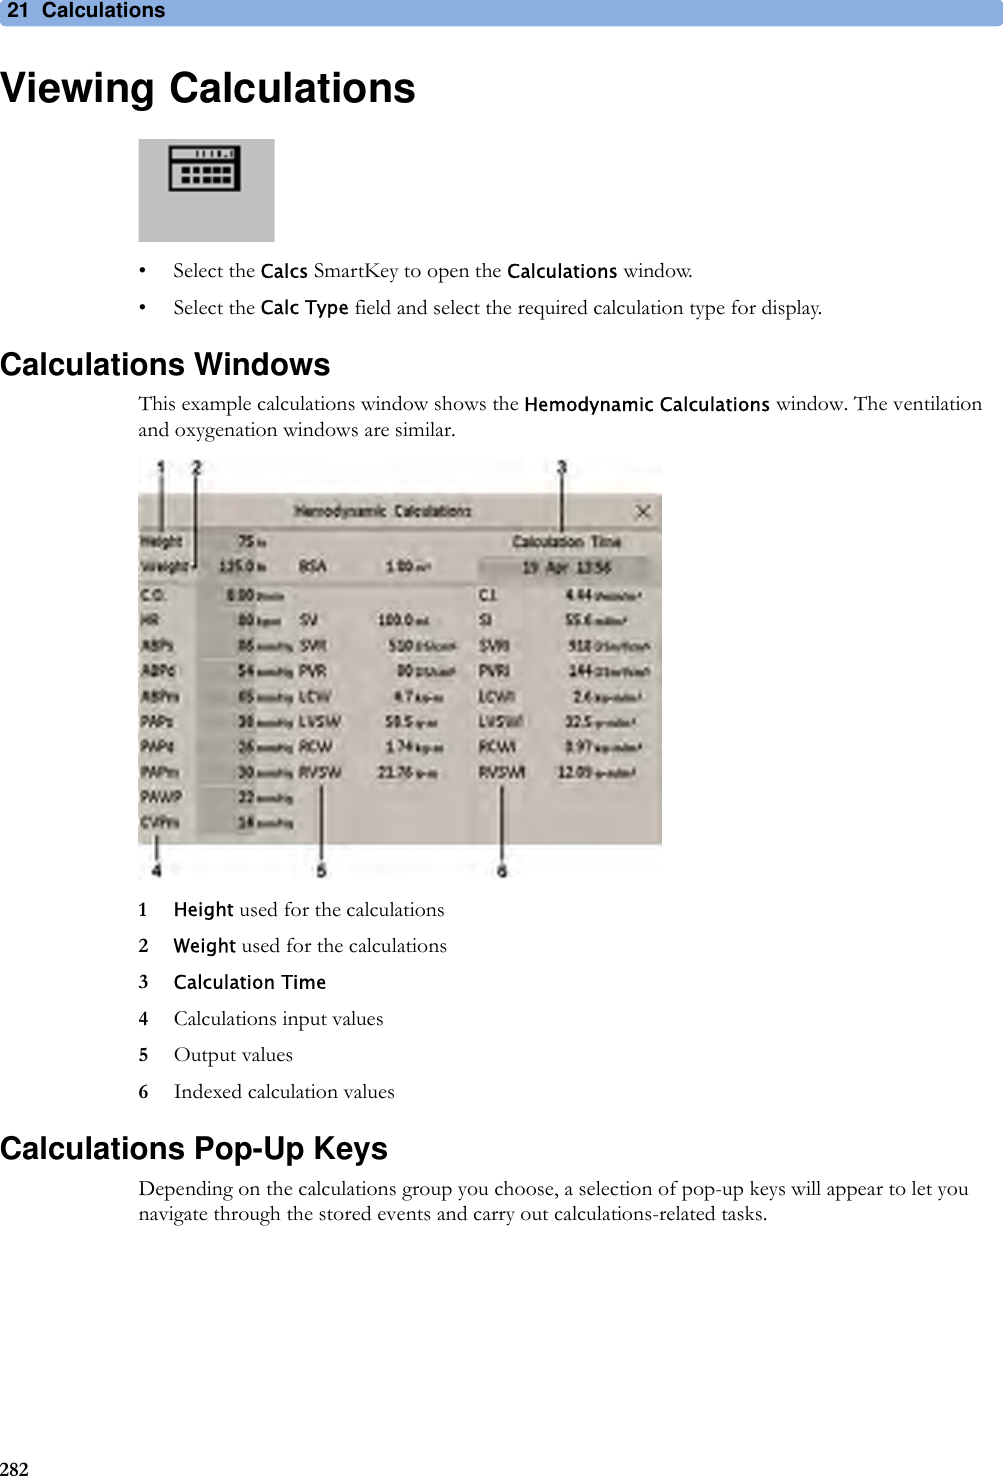 21 Calculations282Viewing Calculations• Select the Calcs SmartKey to open the Calculations window.• Select the Calc Type field and select the required calculation type for display.Calculations WindowsThis example calculations window shows the Hemodynamic Calculations window. The ventilation and oxygenation windows are similar.1Height used for the calculations2Weight used for the calculations3Calculation Time4Calculations input values5Output values6Indexed calculation valuesCalculations Pop-Up KeysDepending on the calculations group you choose, a selection of pop-up keys will appear to let you navigate through the stored events and carry out calculations-related tasks.